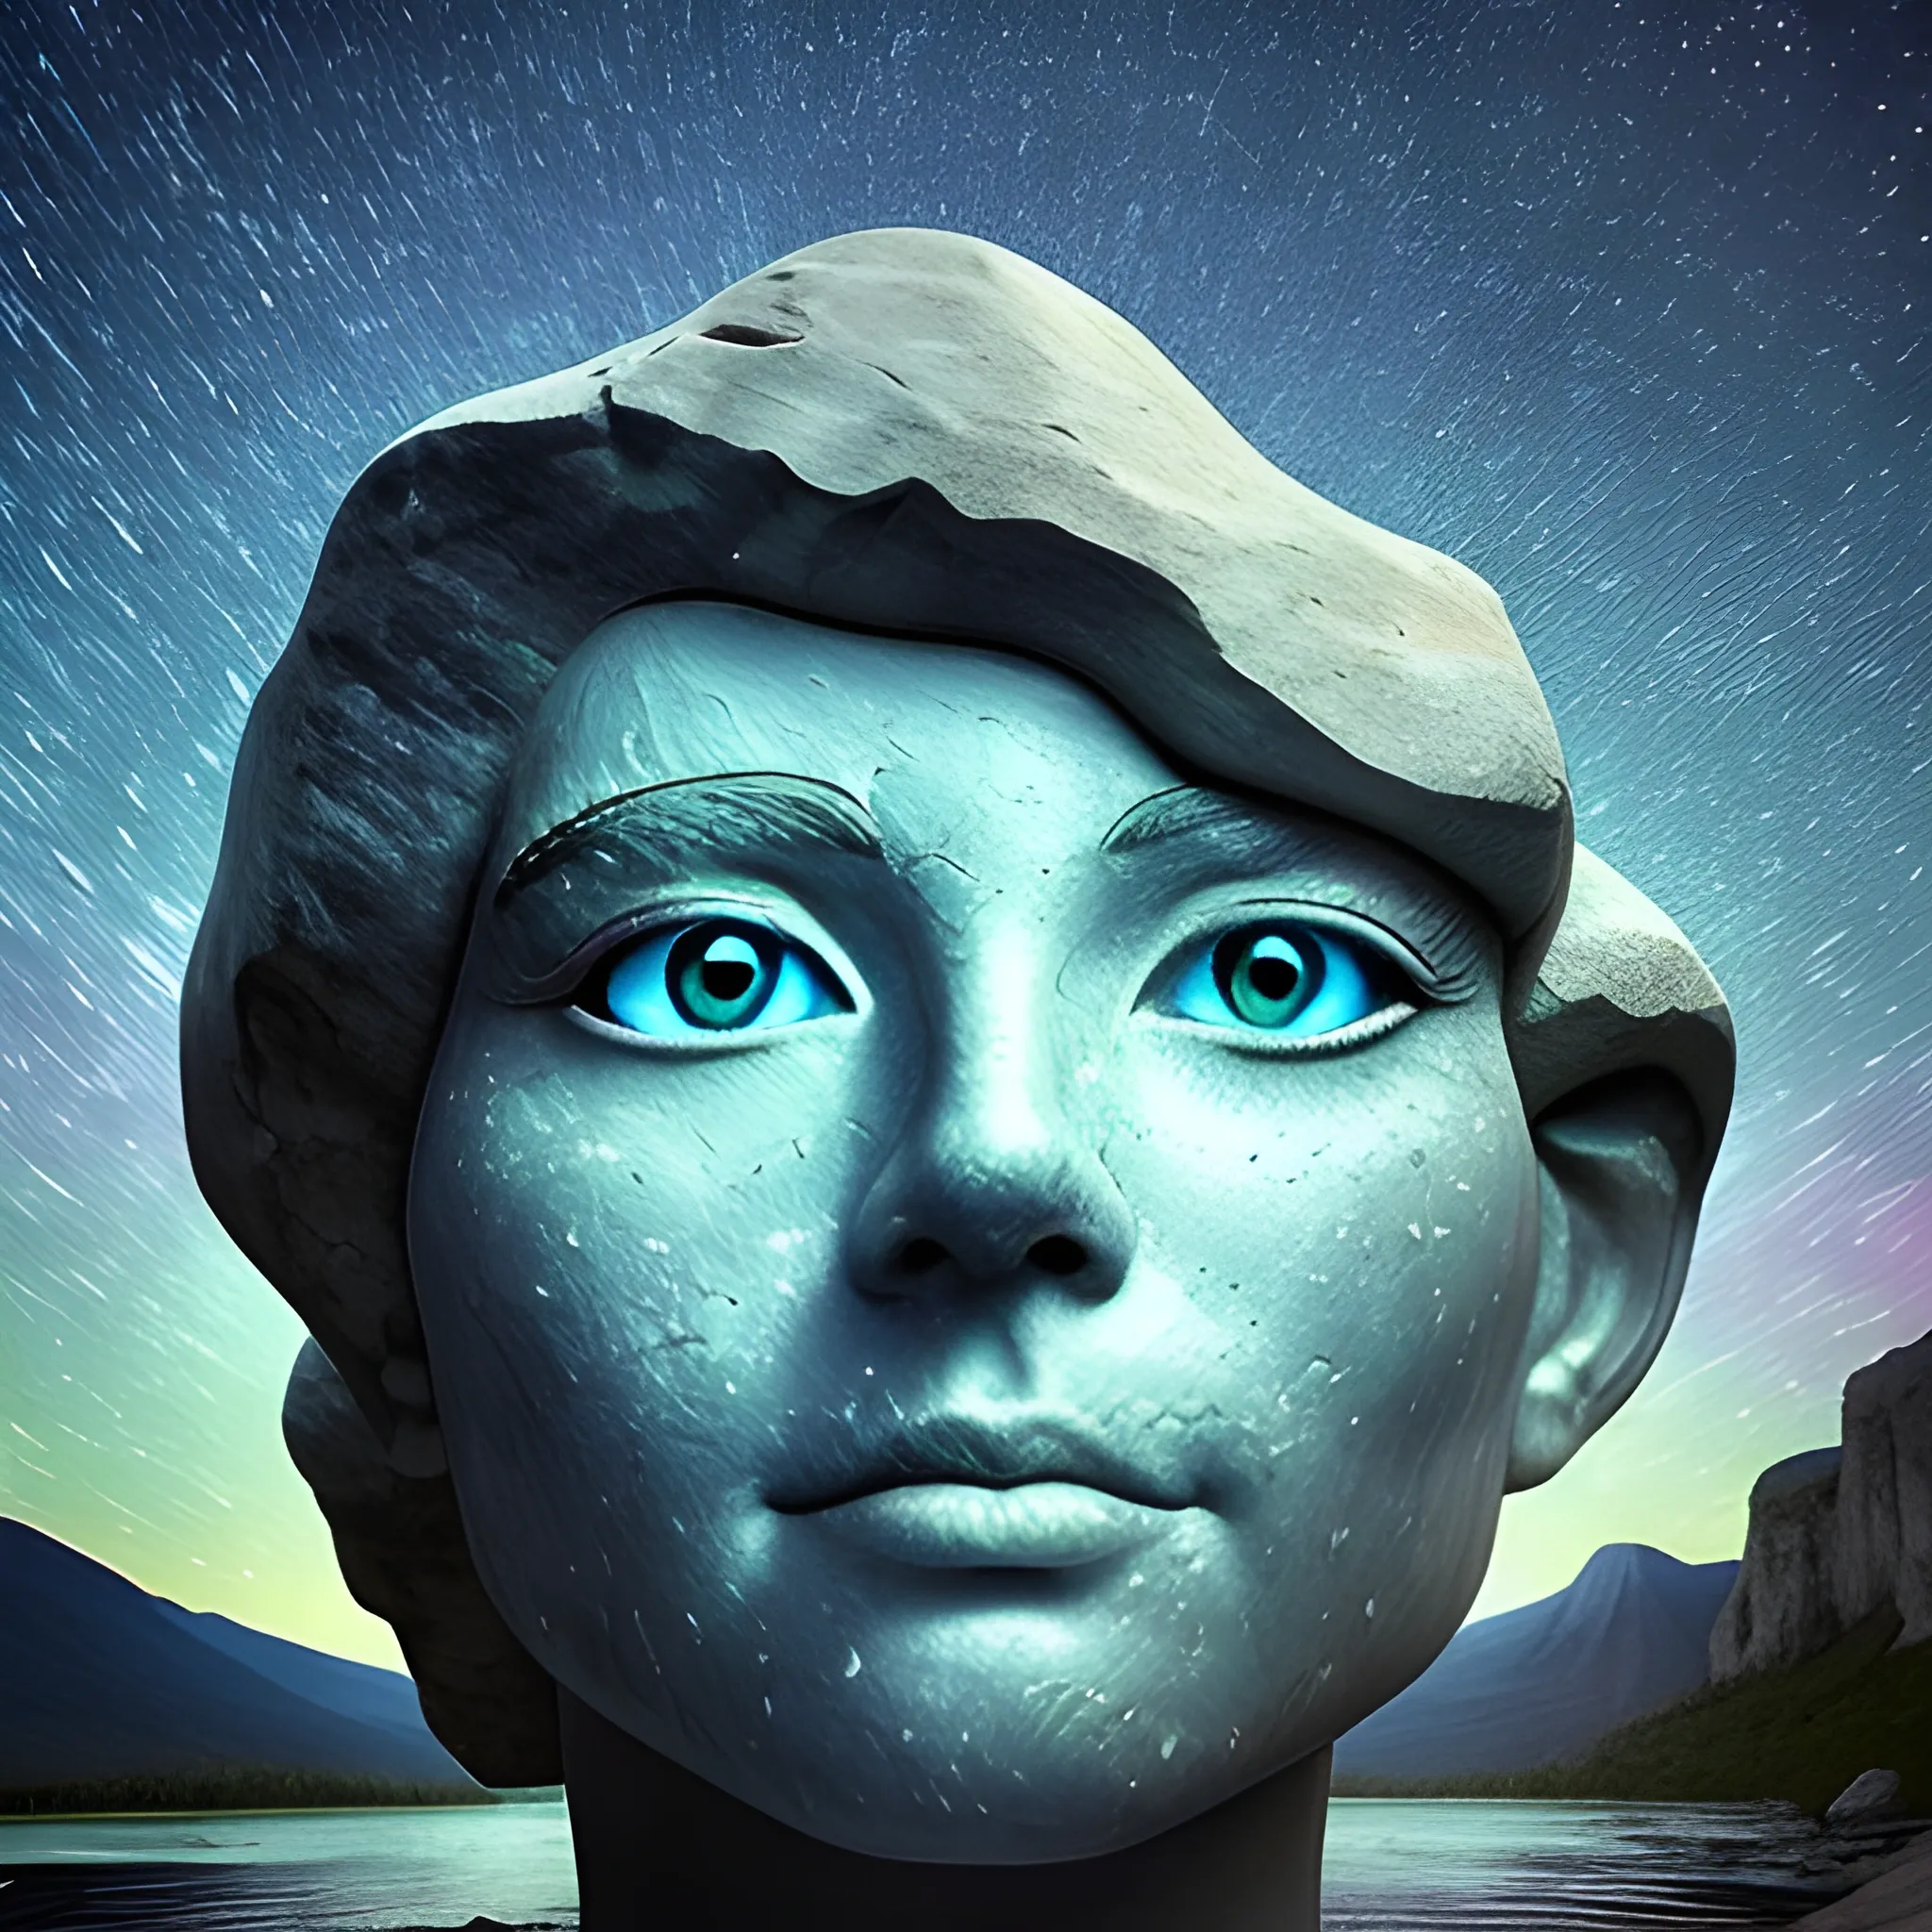 face sculpted in an immense mountain of limestone rock and waterfalls gushing from these 2 eyes towards a lake in the foreground, a starry night sky with spinning stars in the background, Trippy